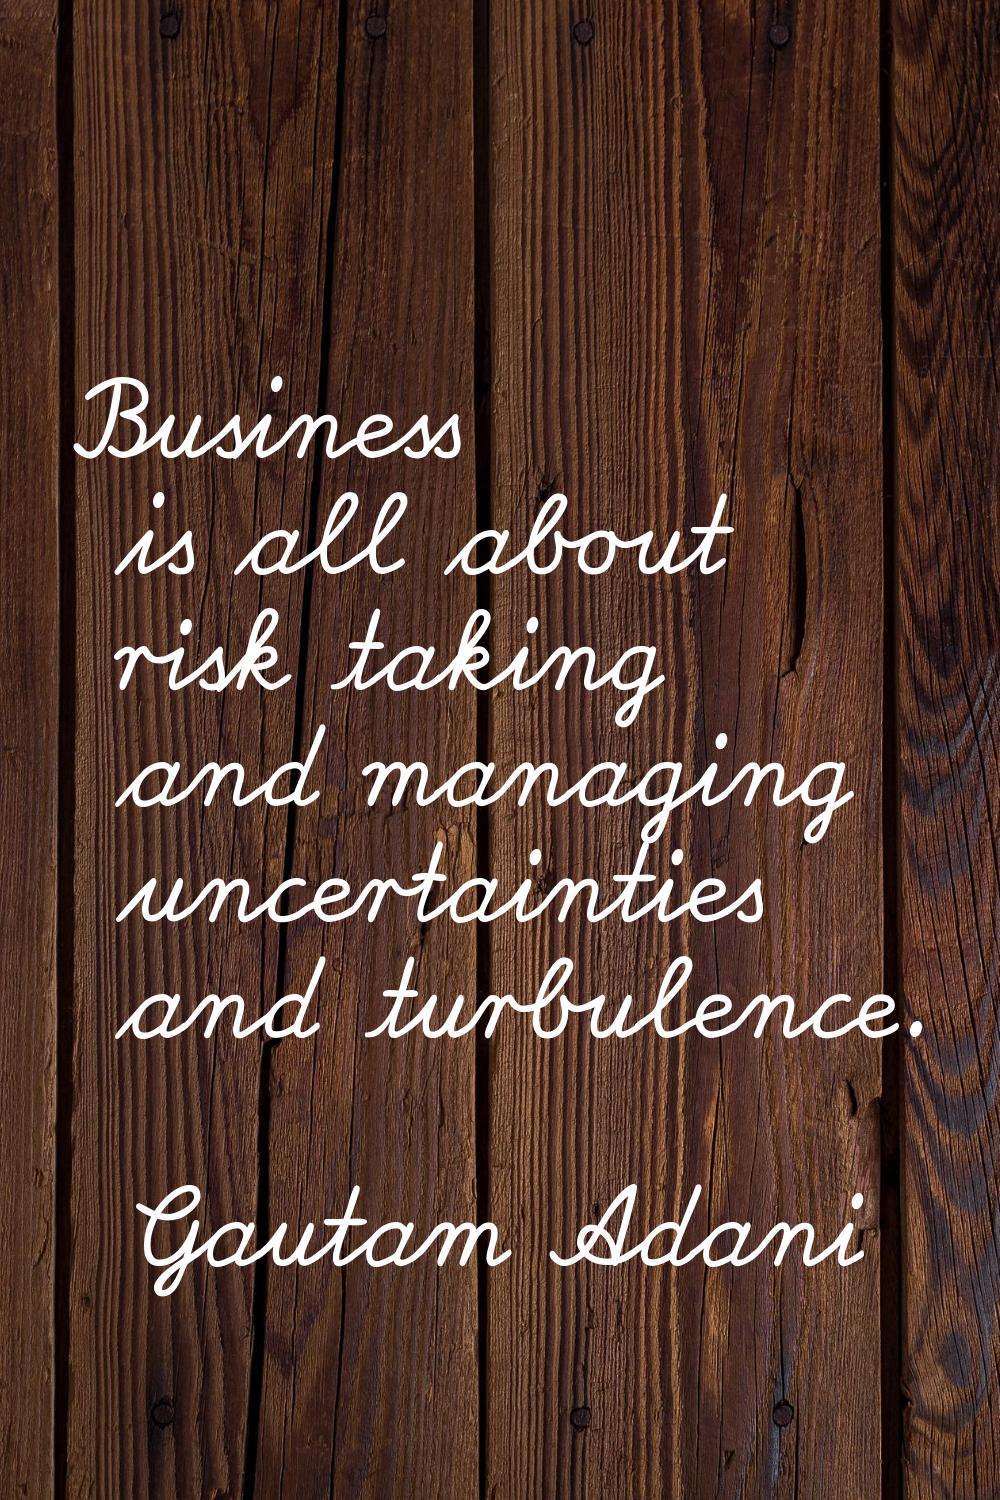 Business is all about risk taking and managing uncertainties and turbulence.